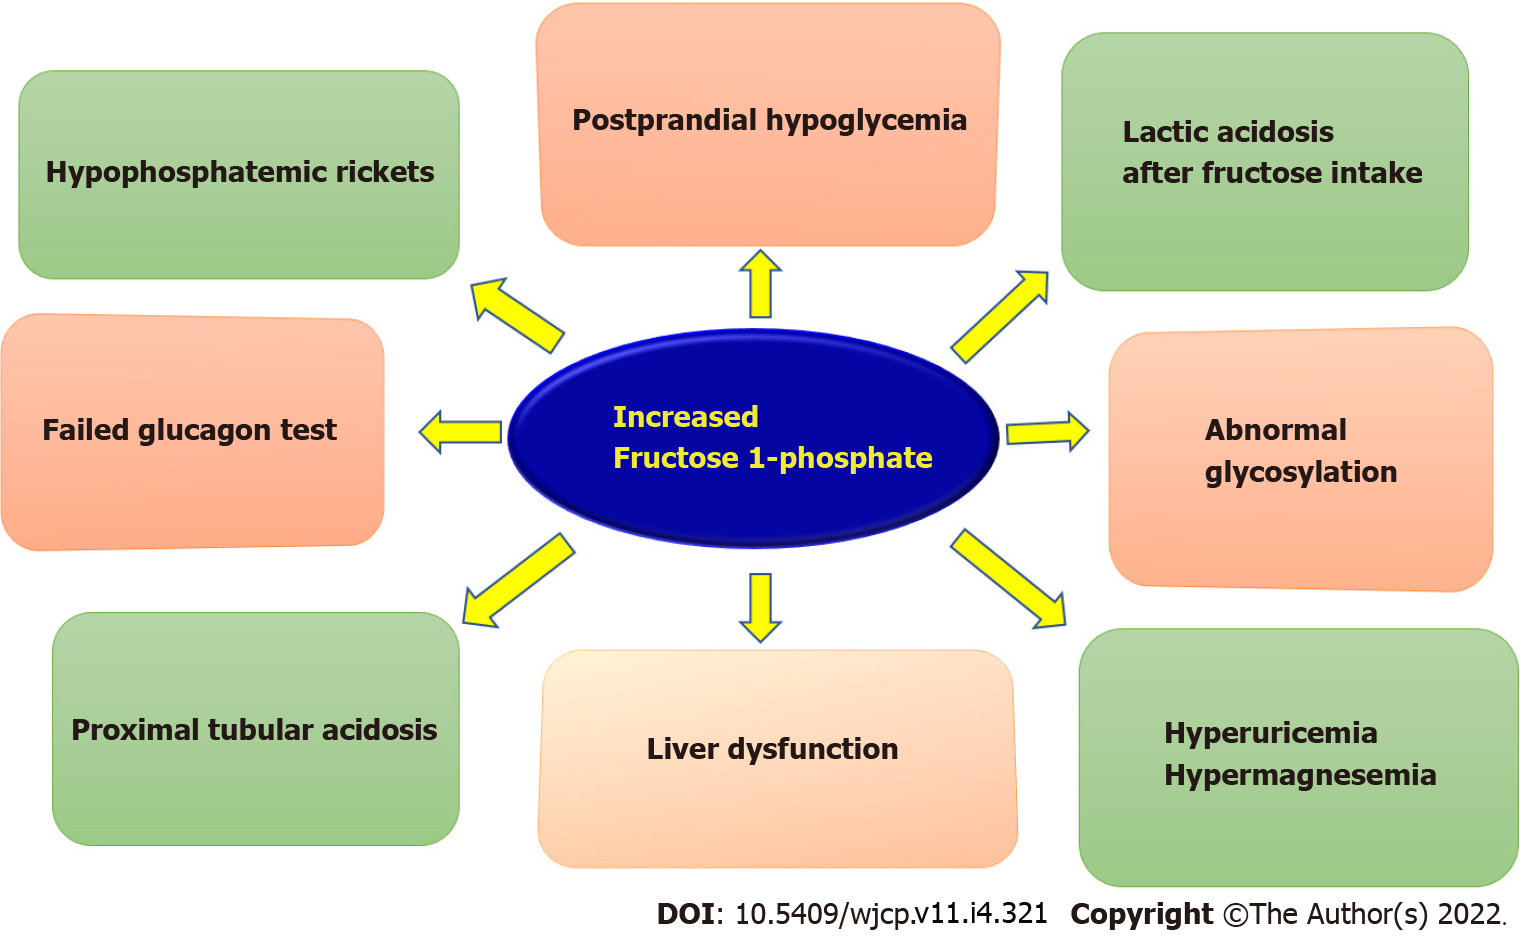 Hereditary fructose intolerance: A comprehensive review